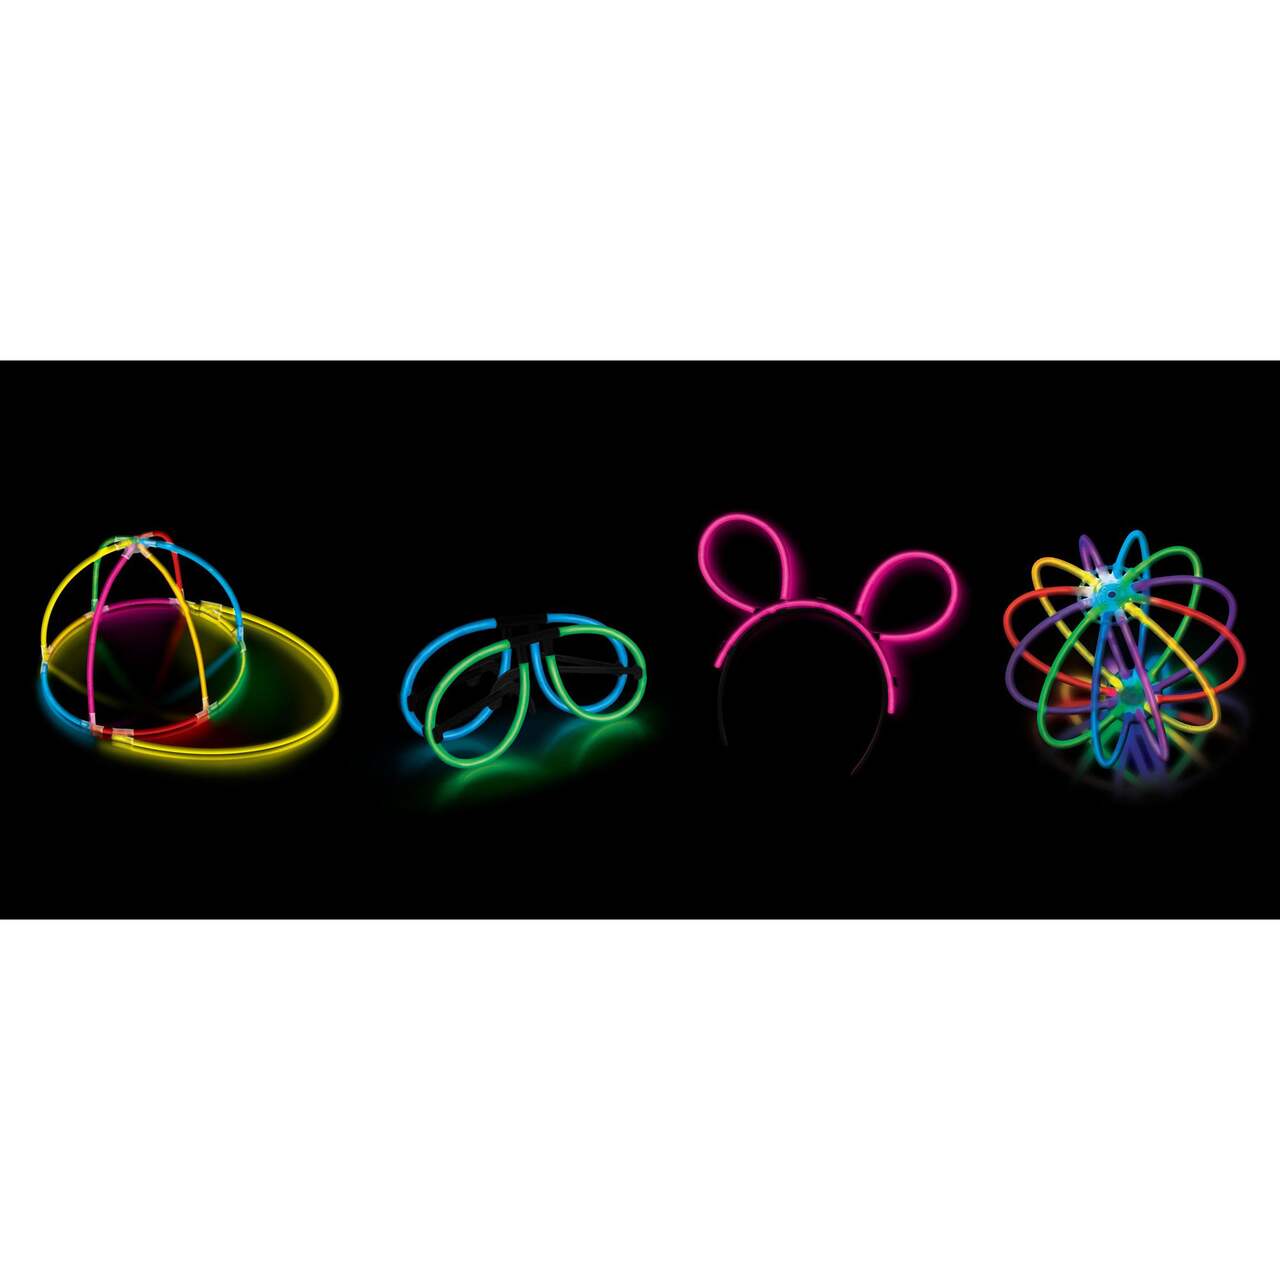 Summer Glowstick Accessory Set, Includes Hat, Glasses, Bunny Ears